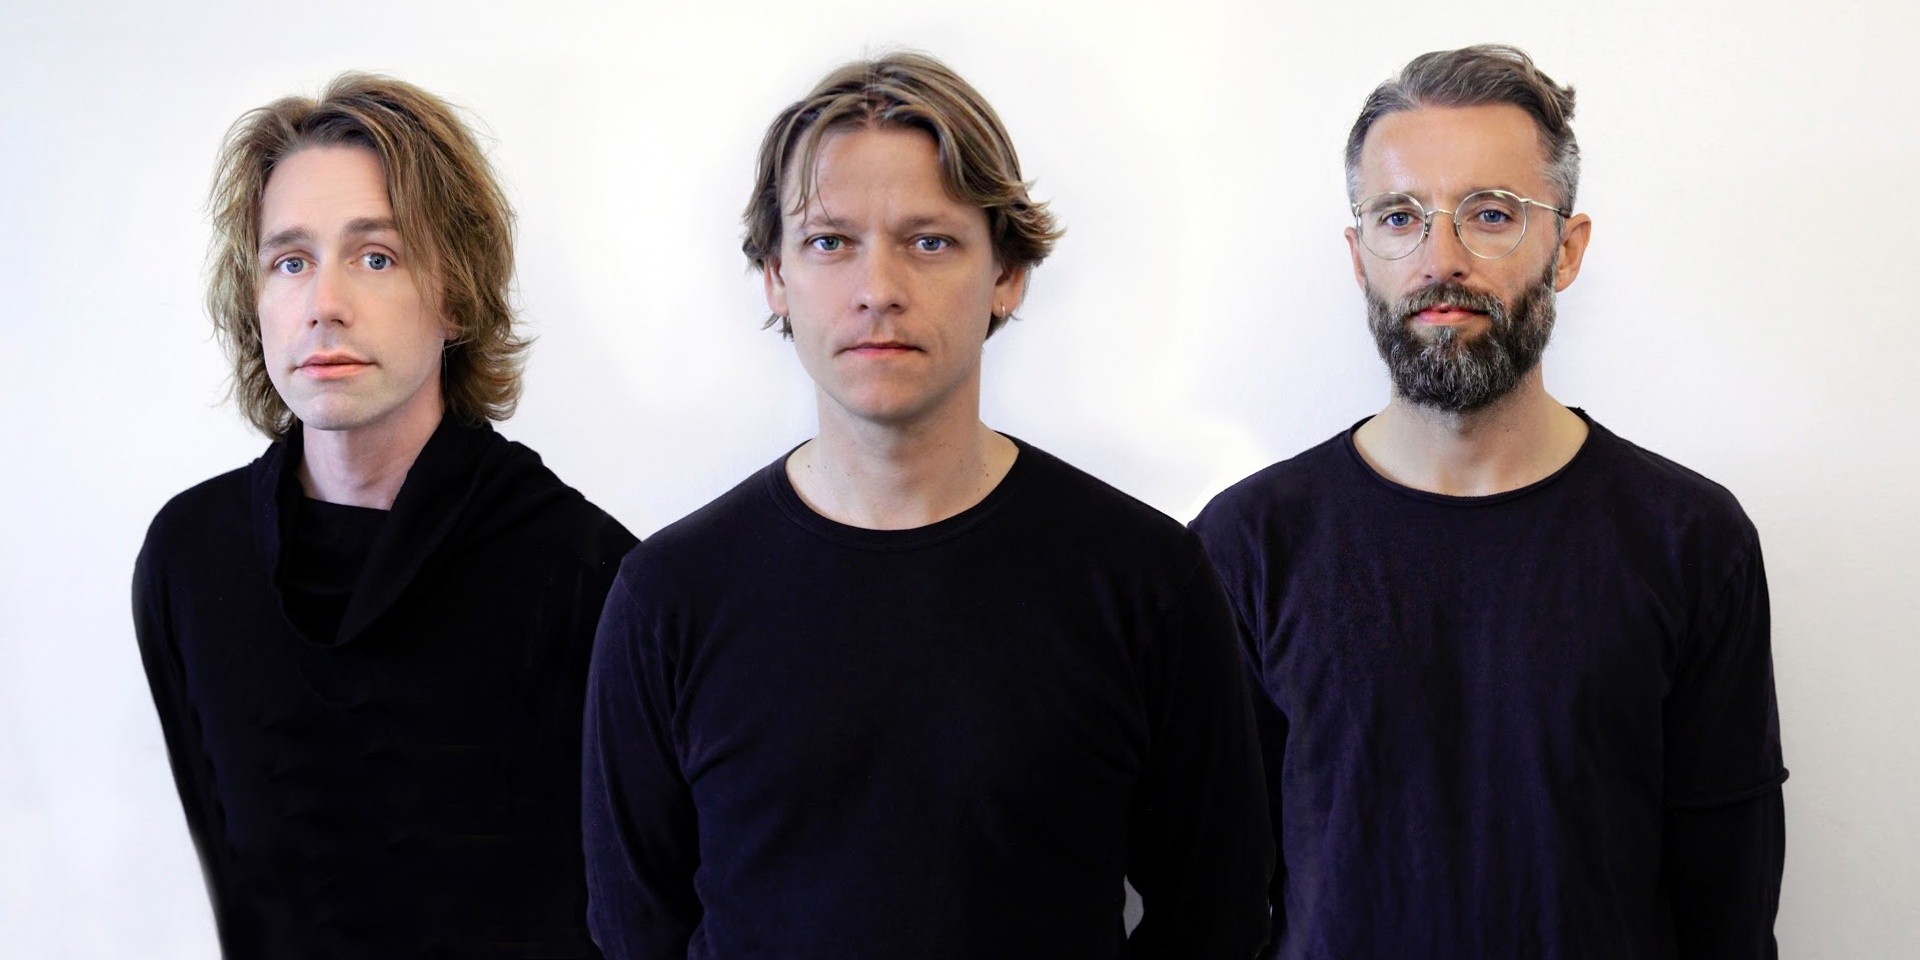 Mew to hold their "most intimate and personal show" in Singapore this year